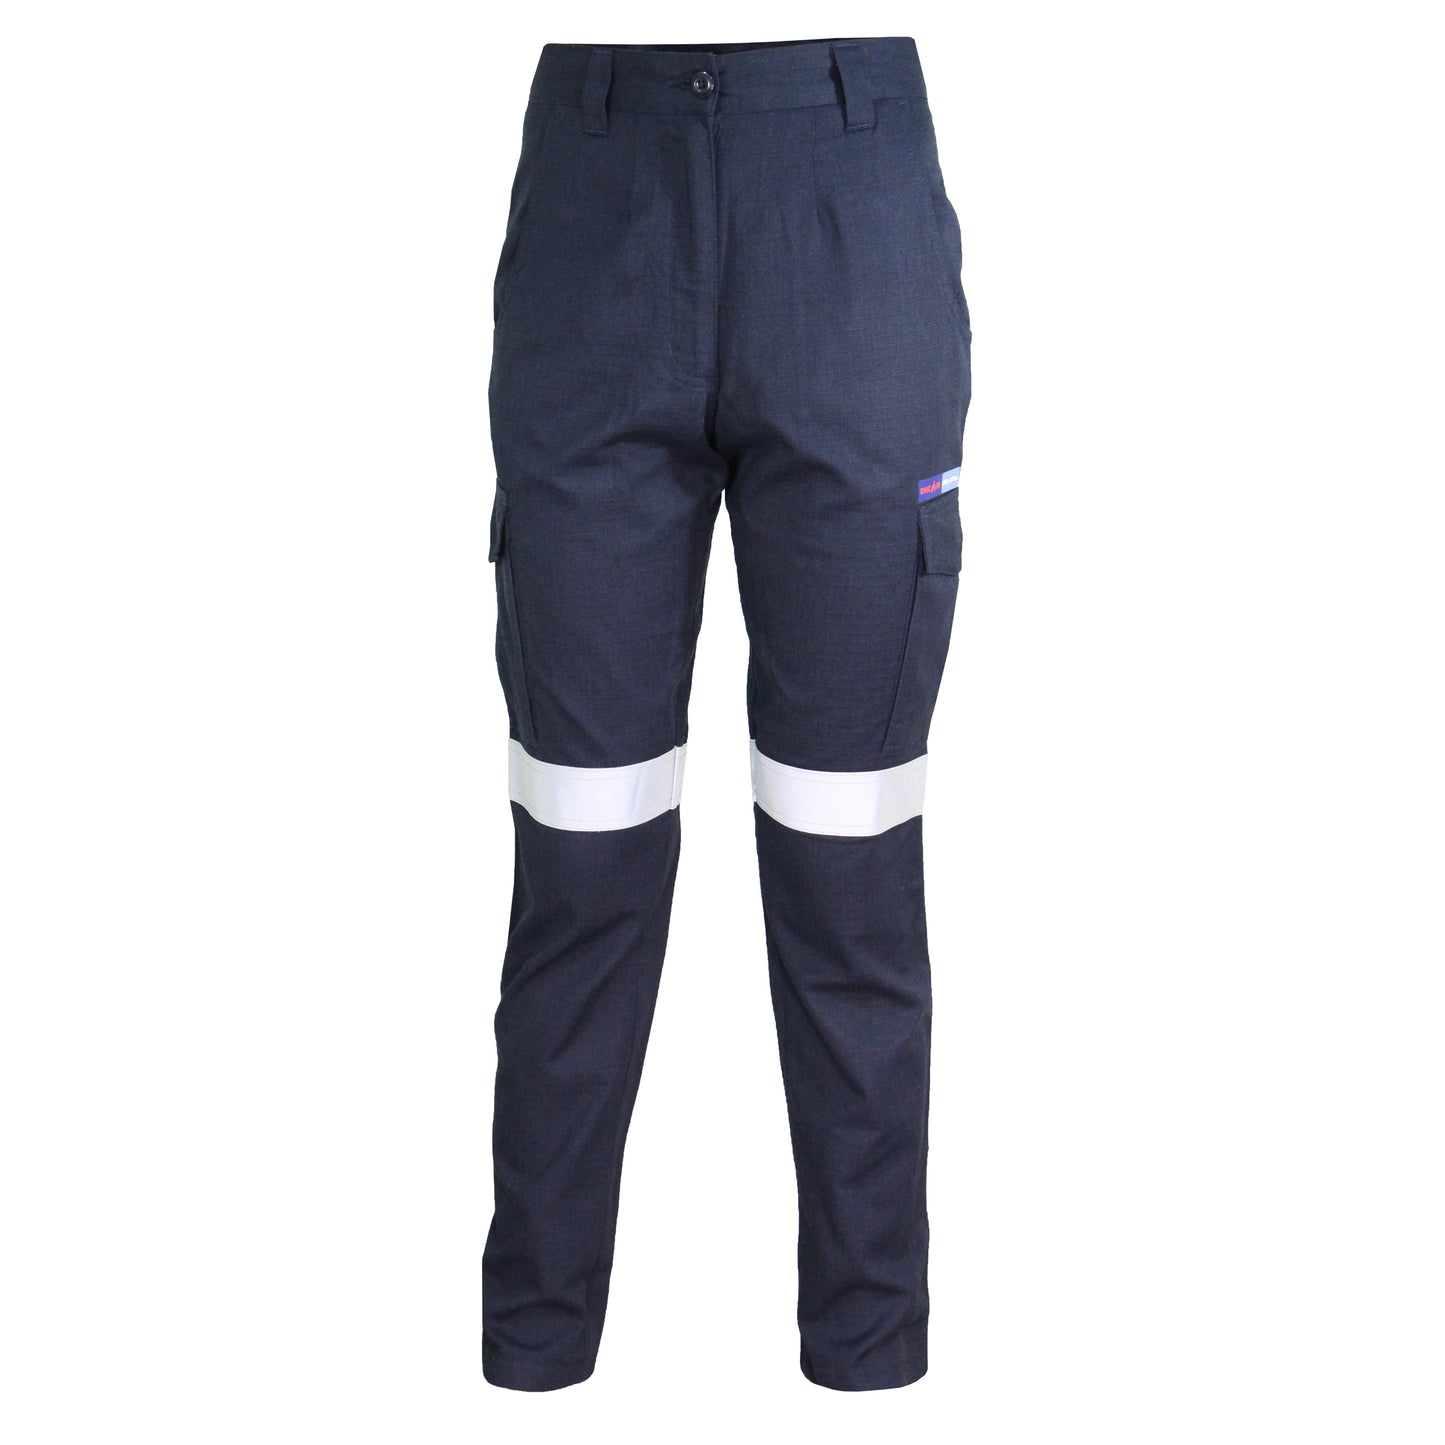 DNC-Ladies Inherent FR PPE2 Taped Cargo Pants-3475